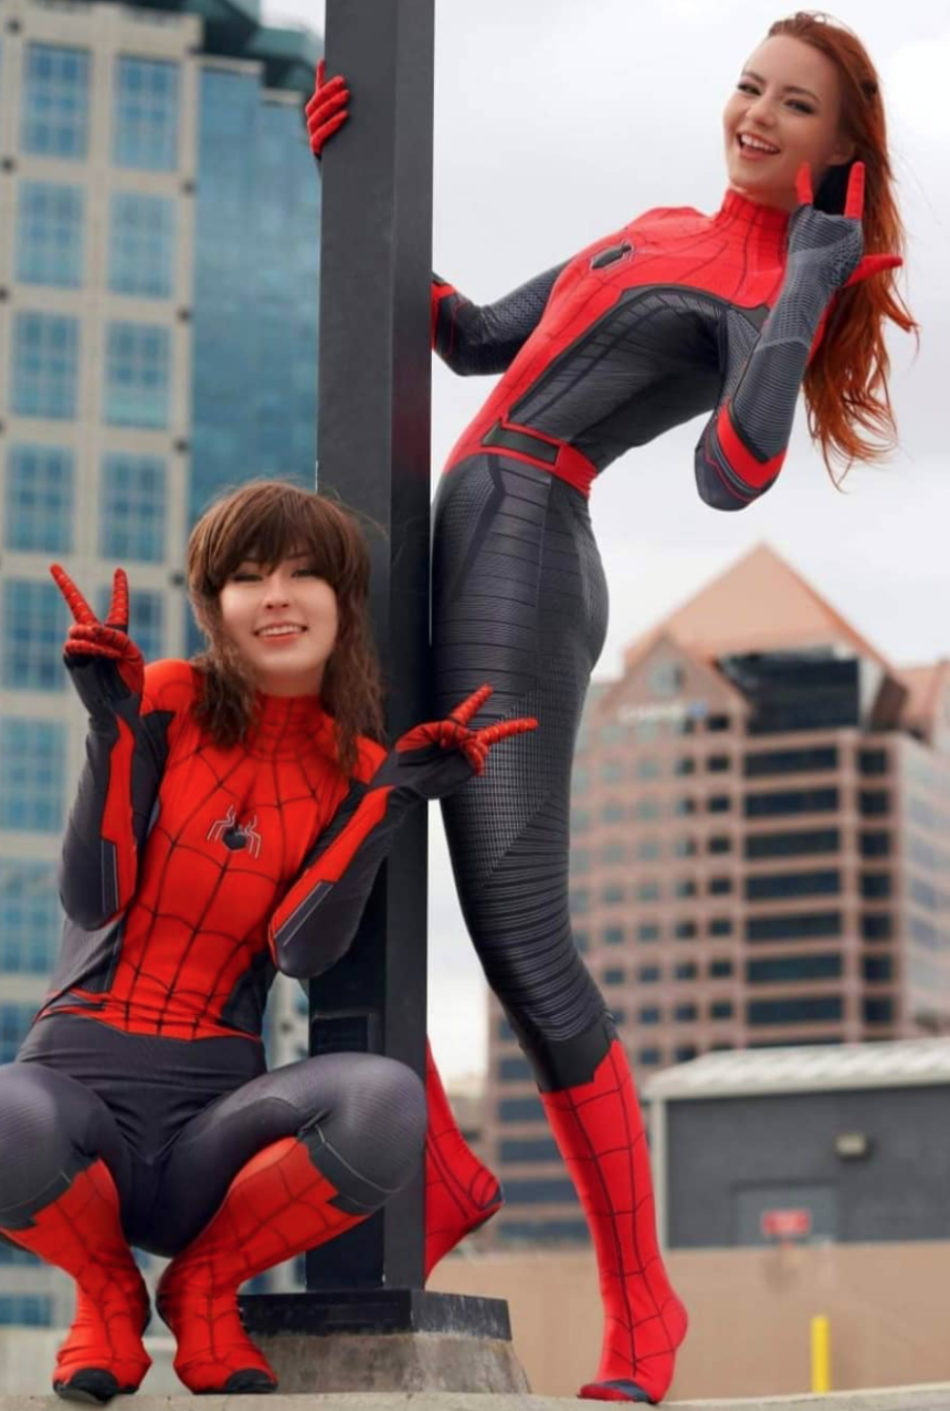 Sexy Red Hot Cosplay Girls Spiderman Women Best Photo Compilation 2021 (89 HQ Photos) 449